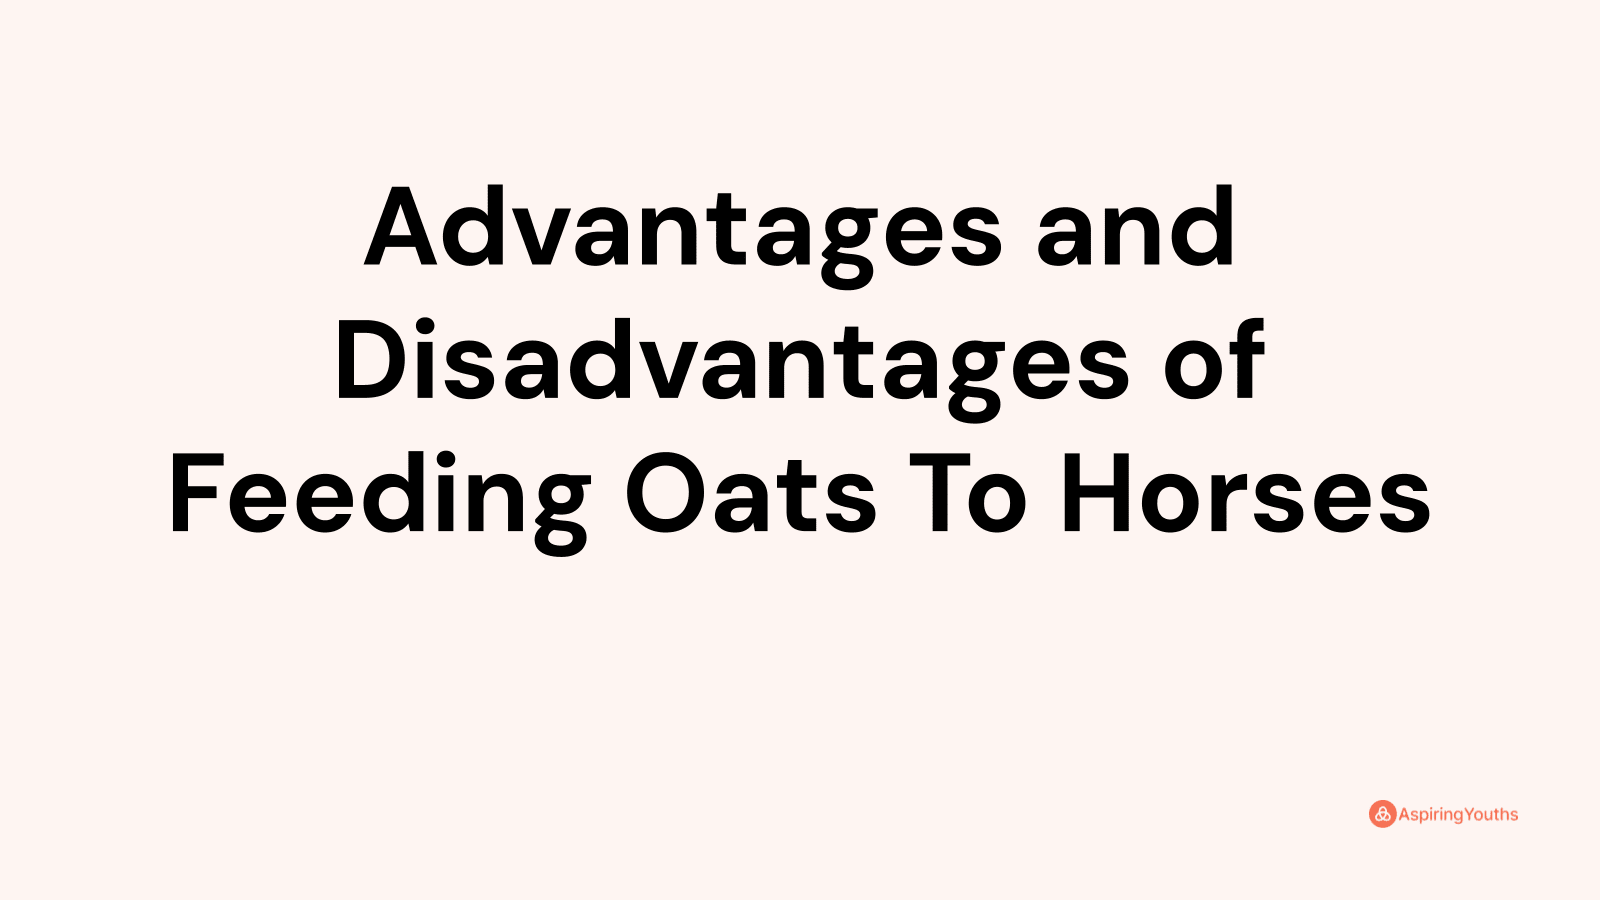 Advantages and Disadvantages of Feeding Oats To Horses